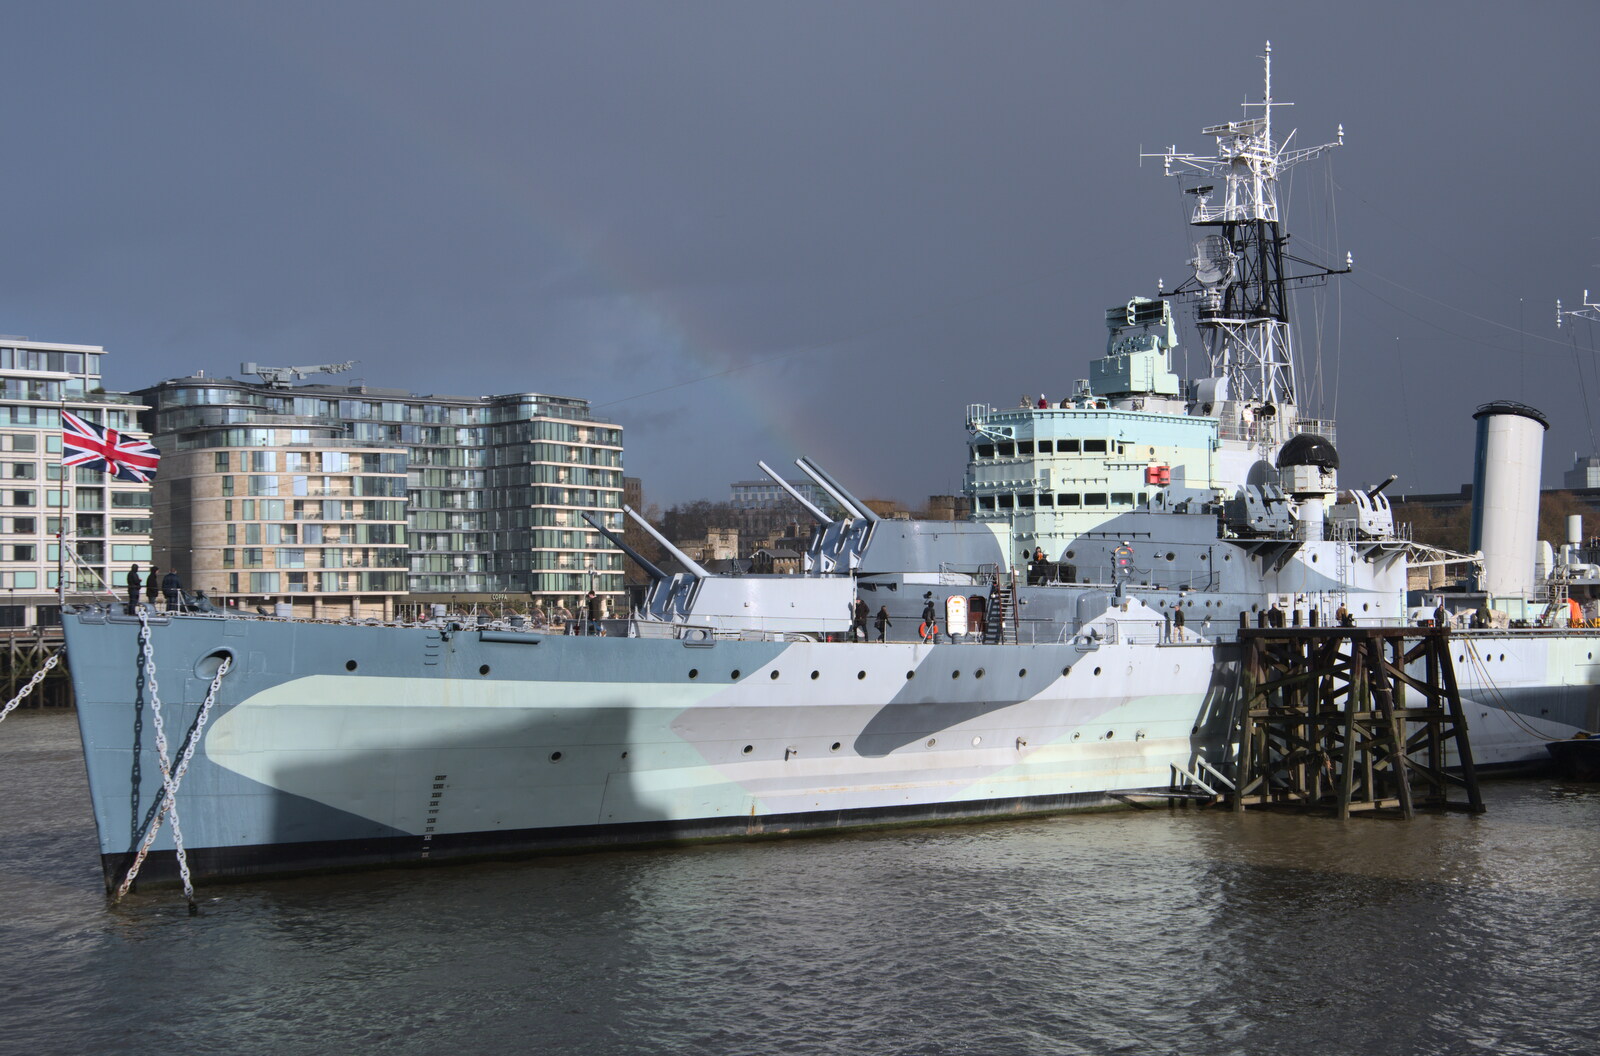 A rainbow briefly appears over HMS Belfast from HMS Belfast and the South Bank, Southwark, London - 17th February 2020